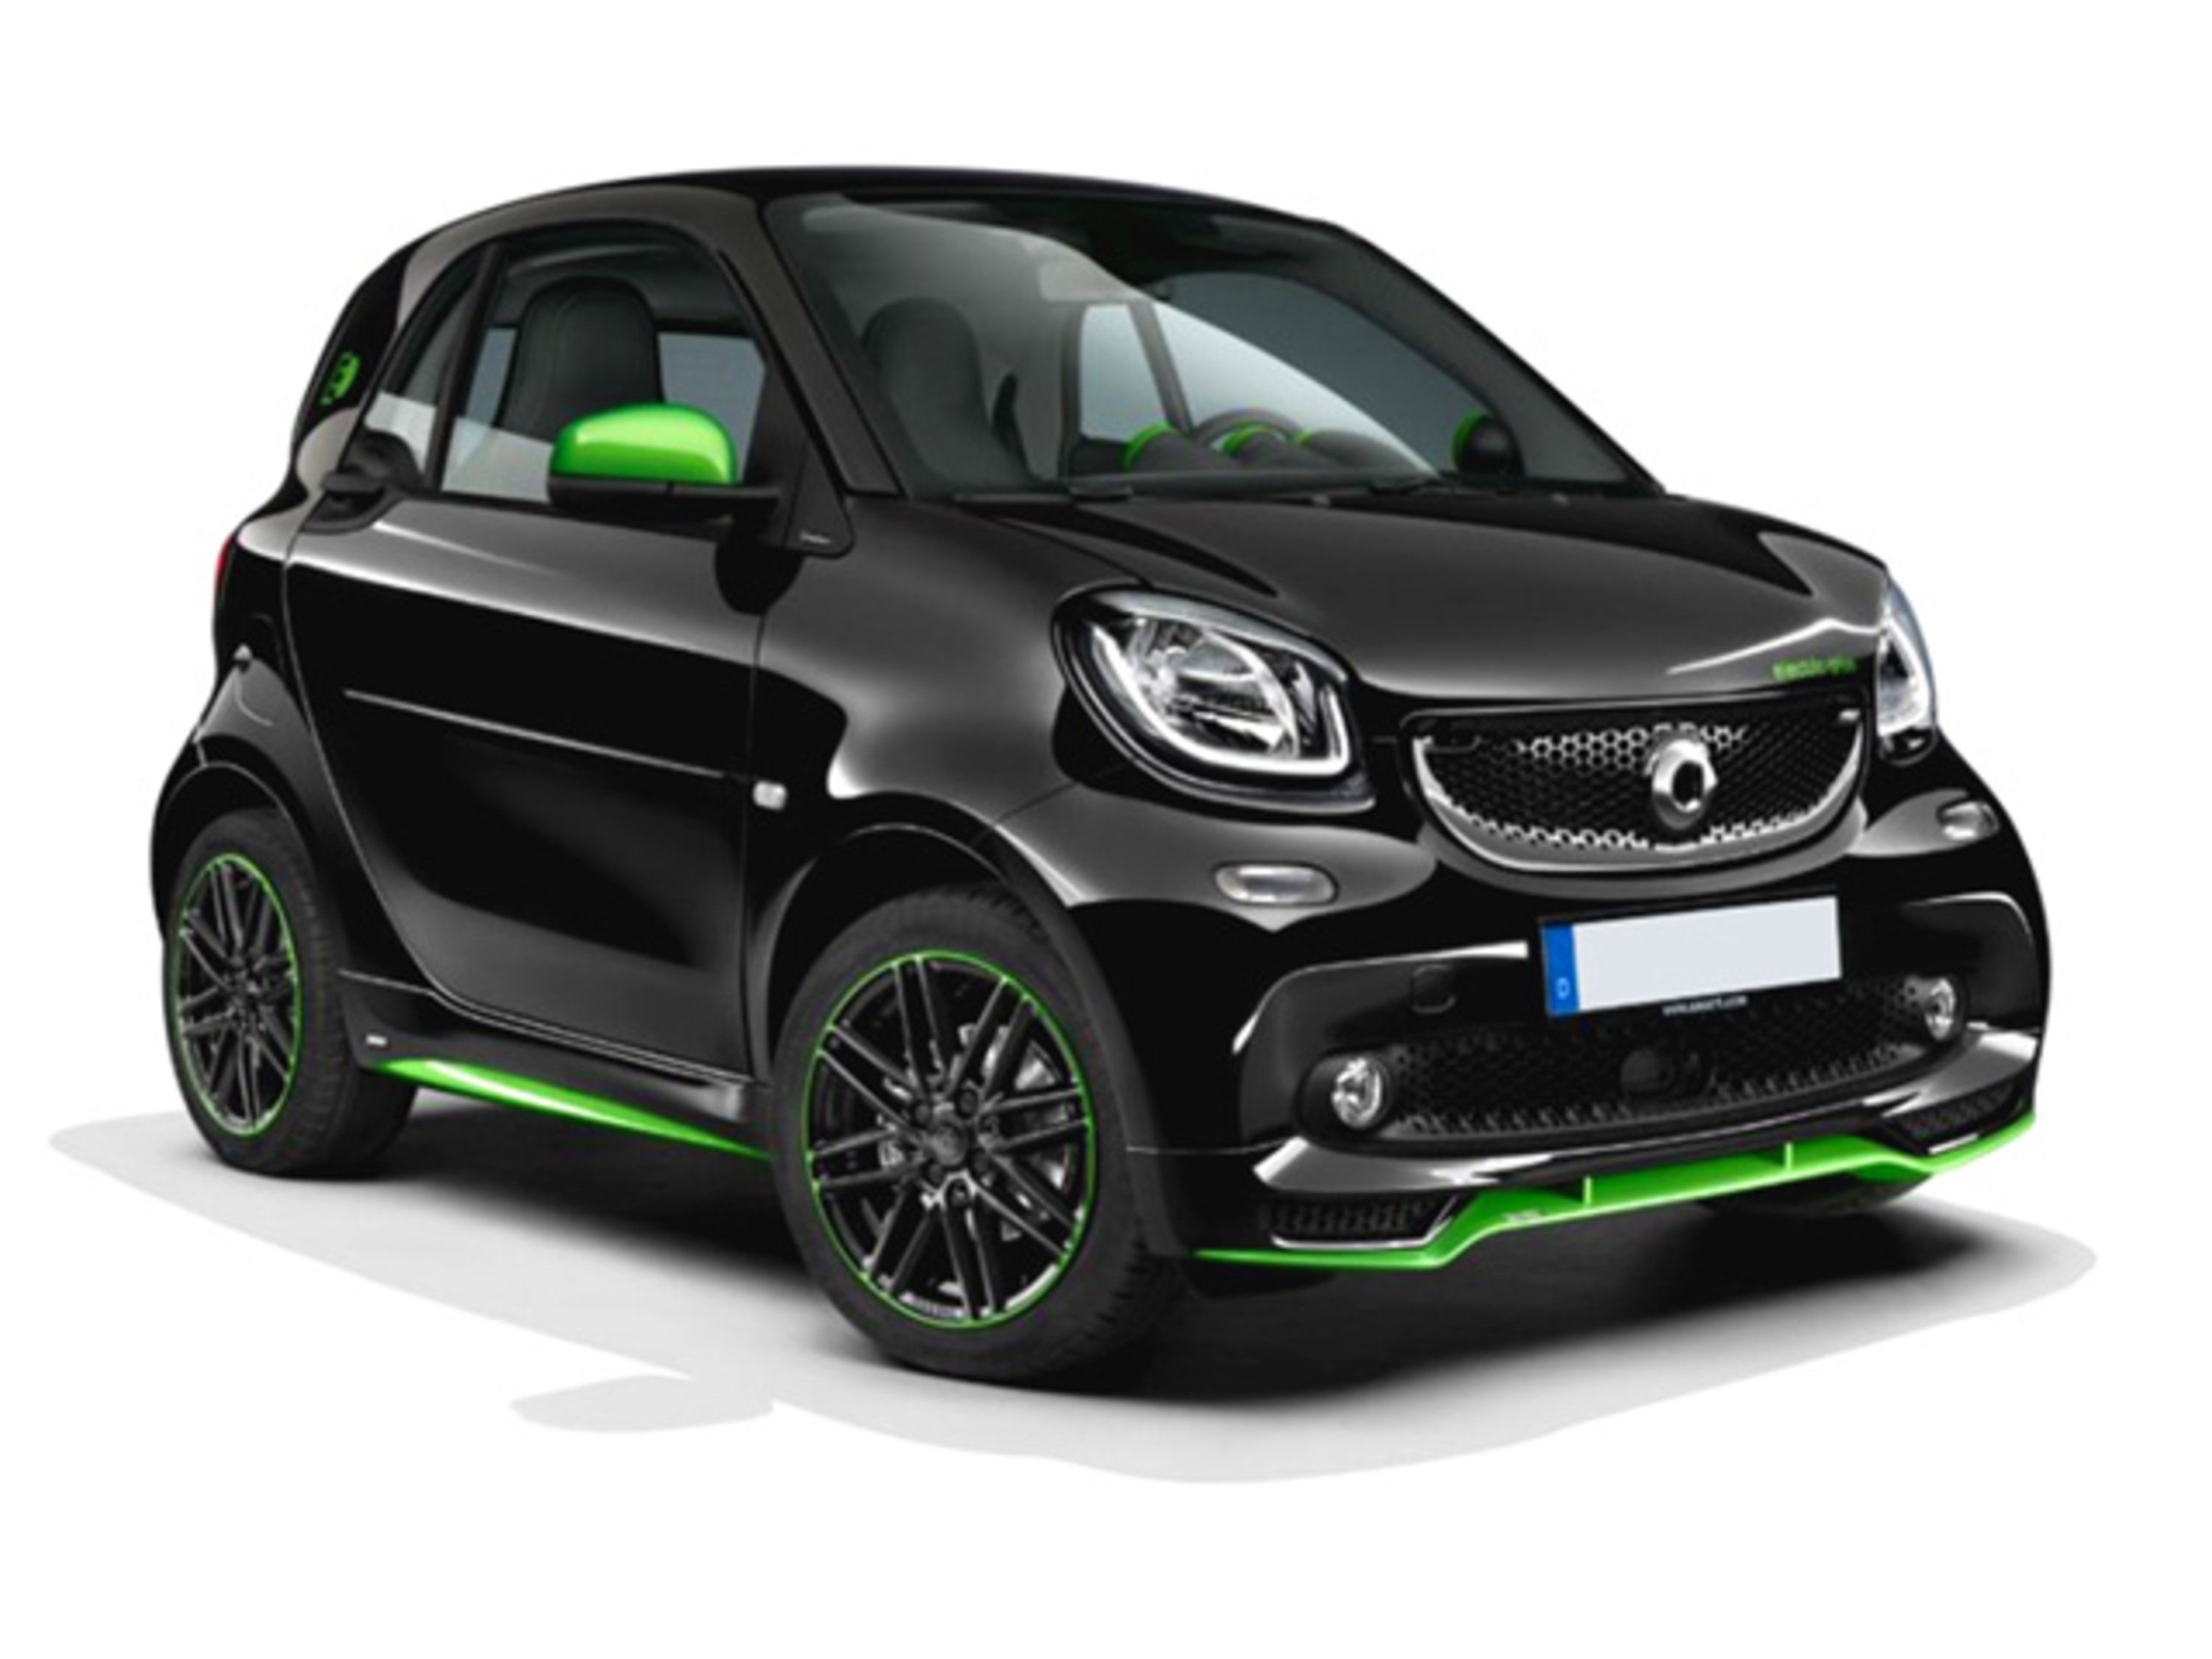 smart fortwo electric drive Greenflash Edition